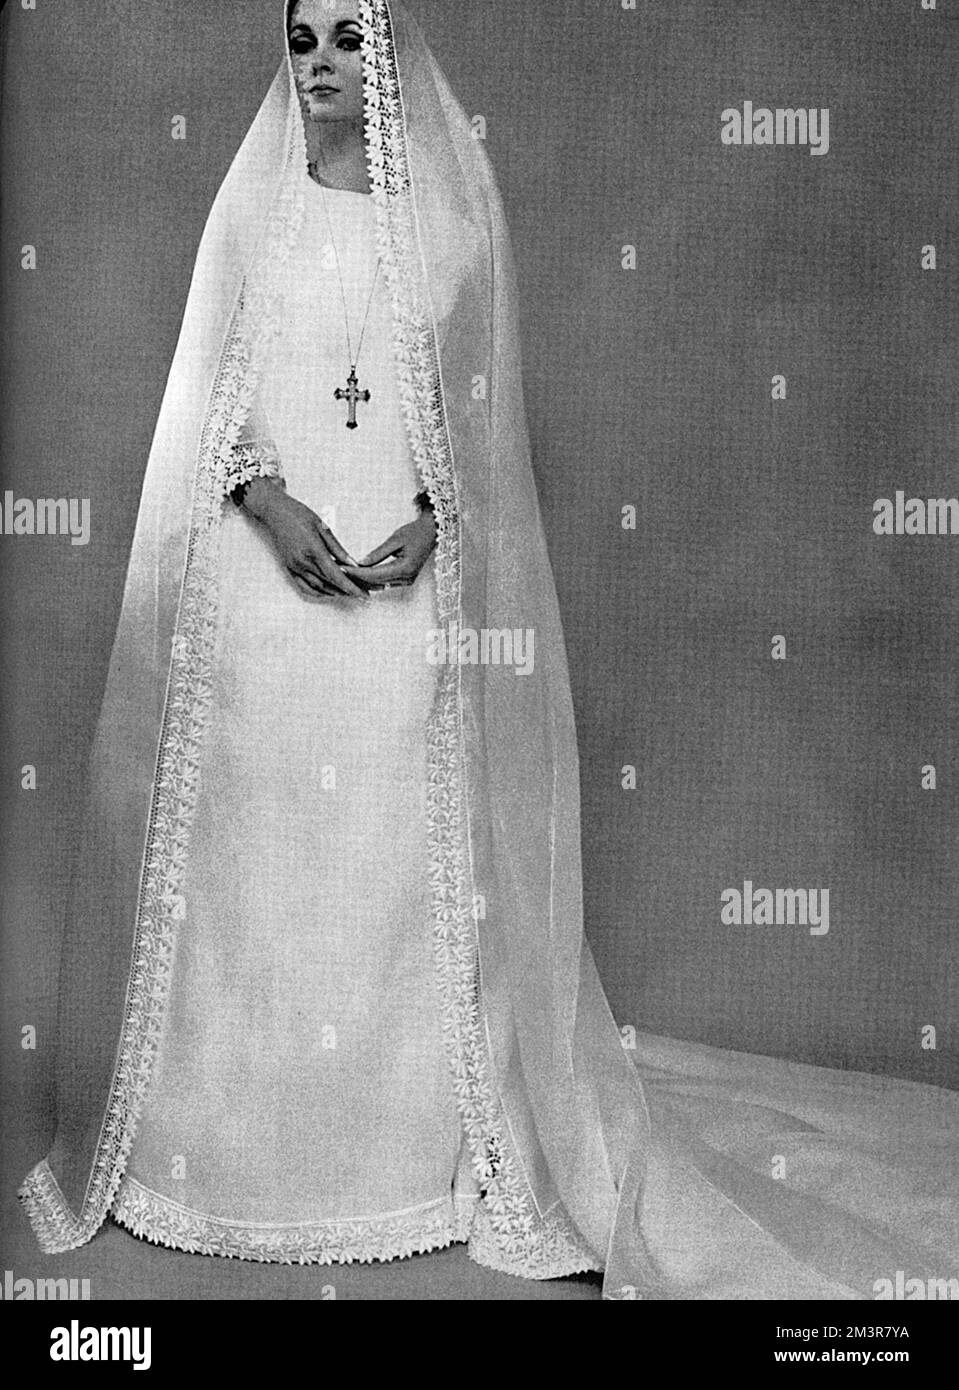 A Camelot-style wedding dress and veil of nun-like simplicity in translucent white organdie with a wide border of guipure lace and the cuffs and hem, also trimming the veil and train.  By Belinda Belville.     Date: 1965 Stock Photo